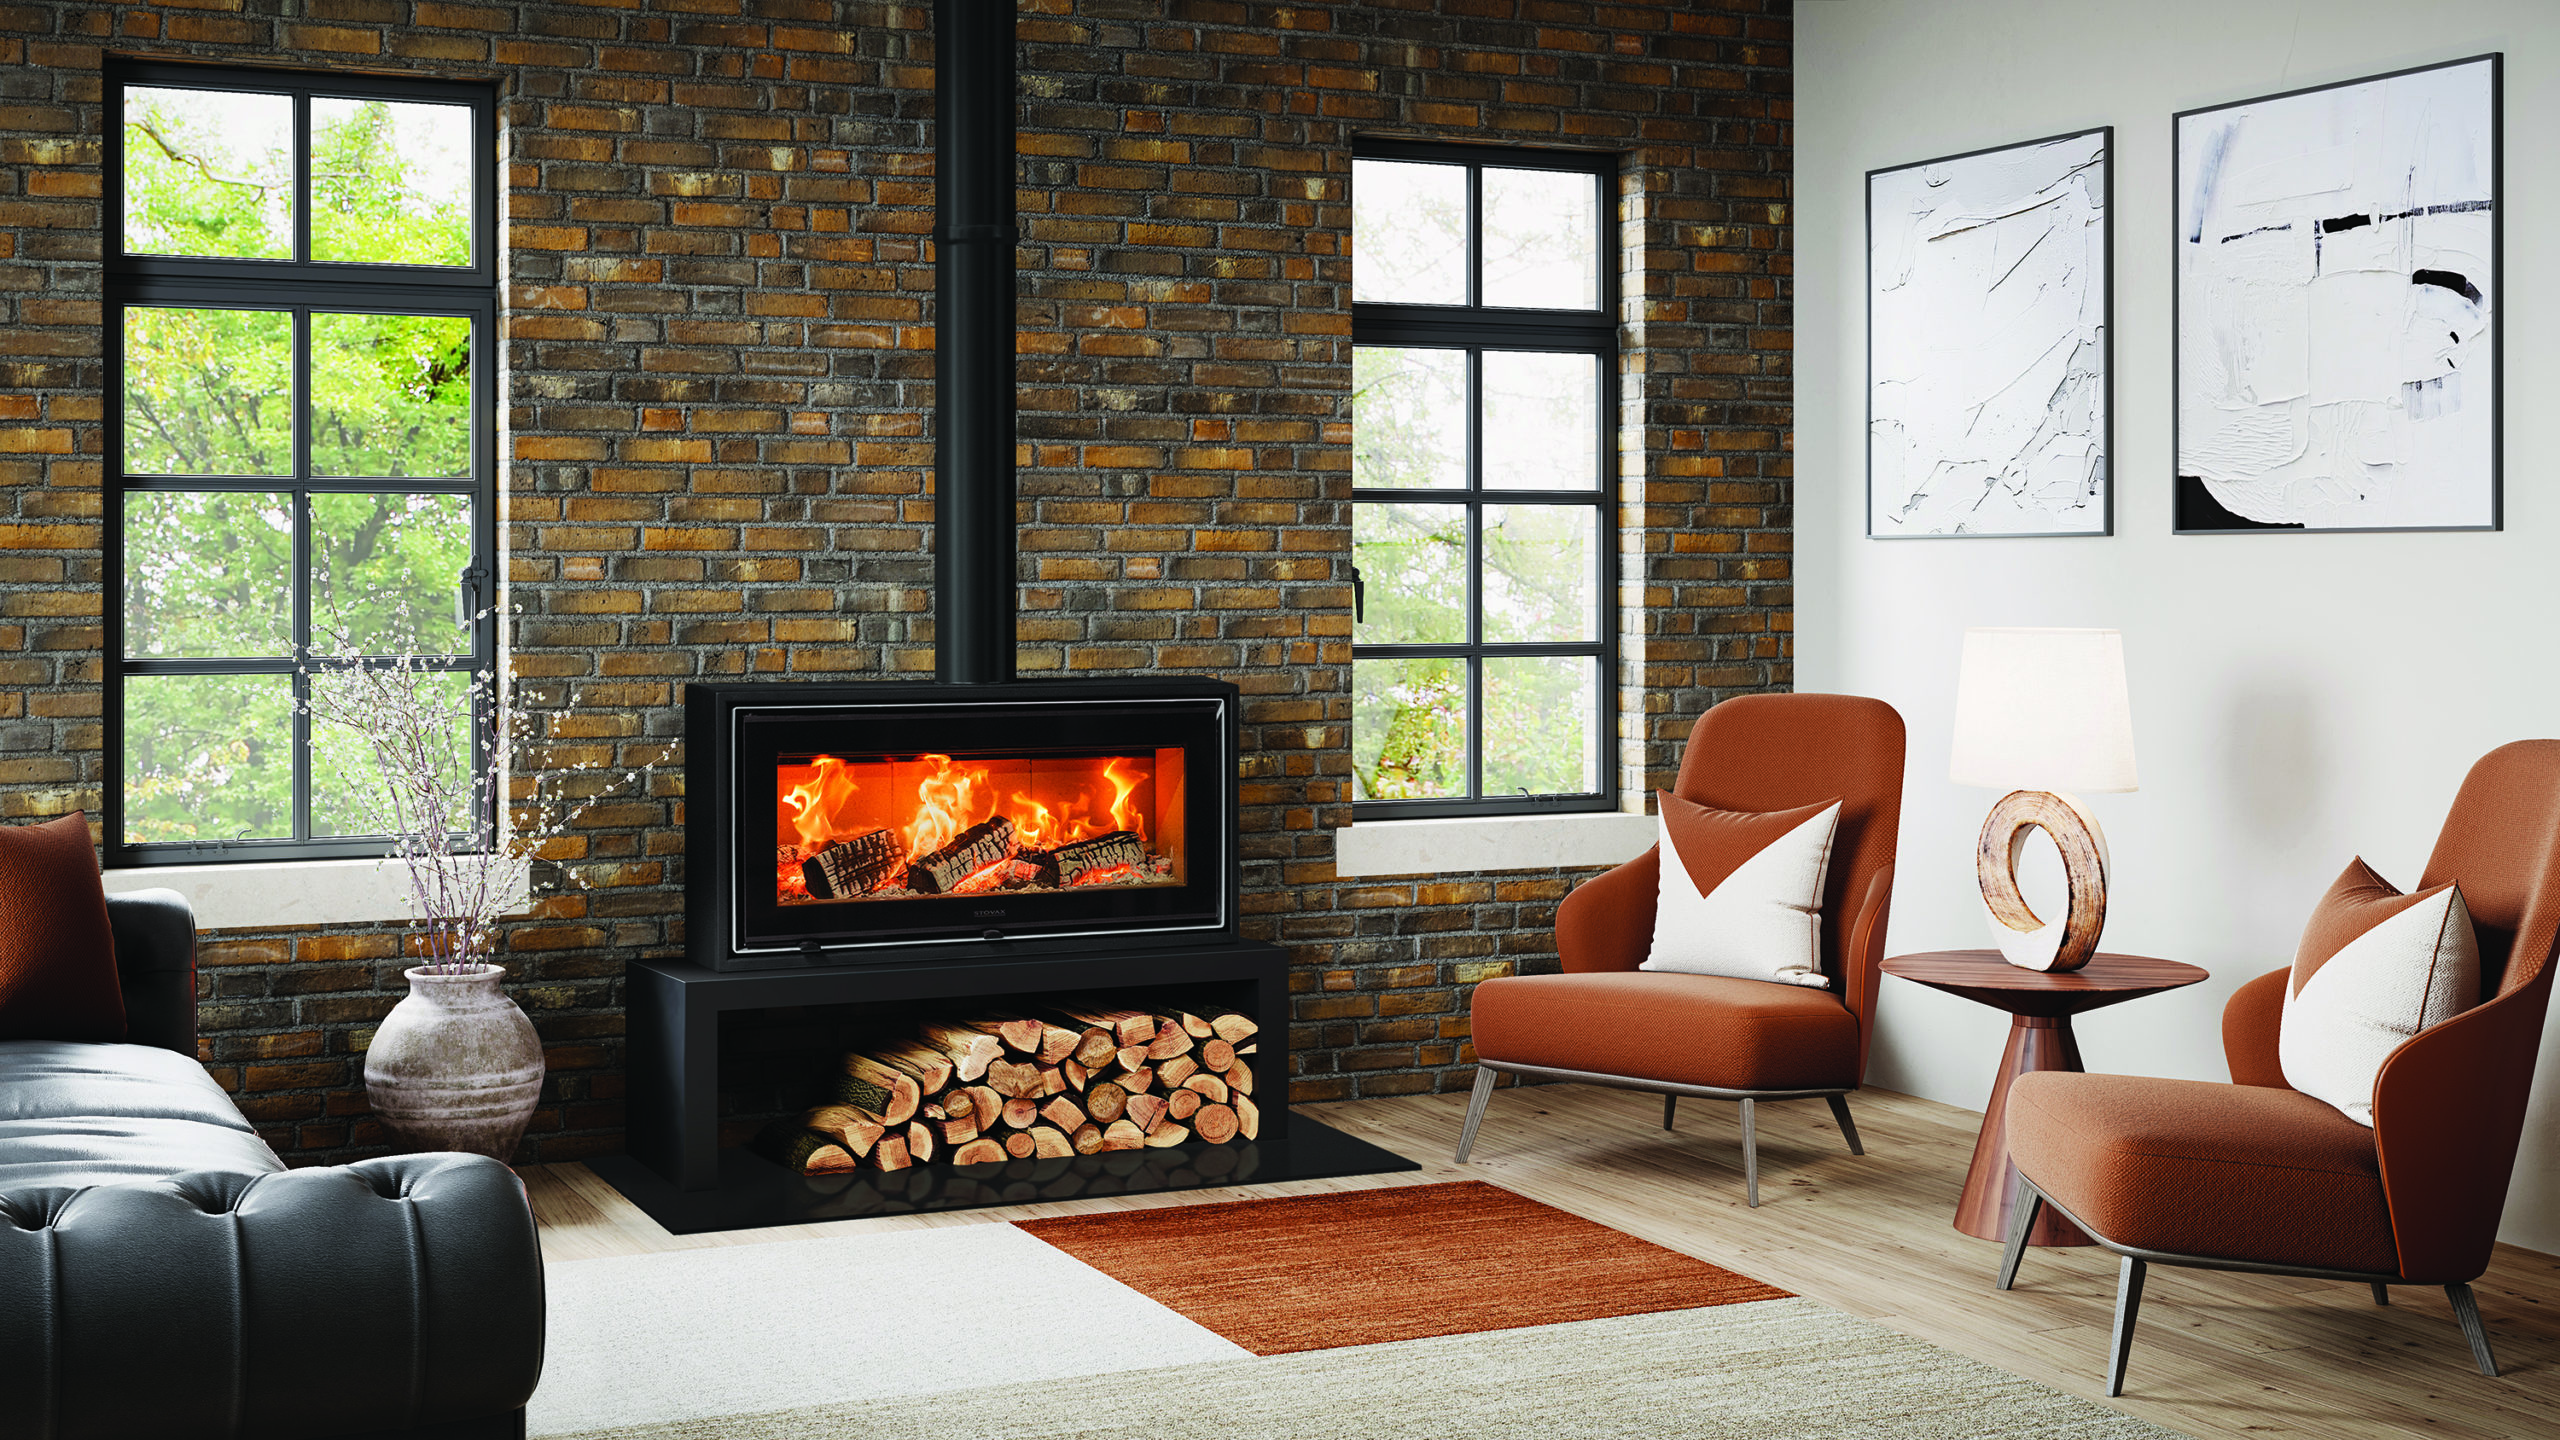 A wood burning stove in a living room